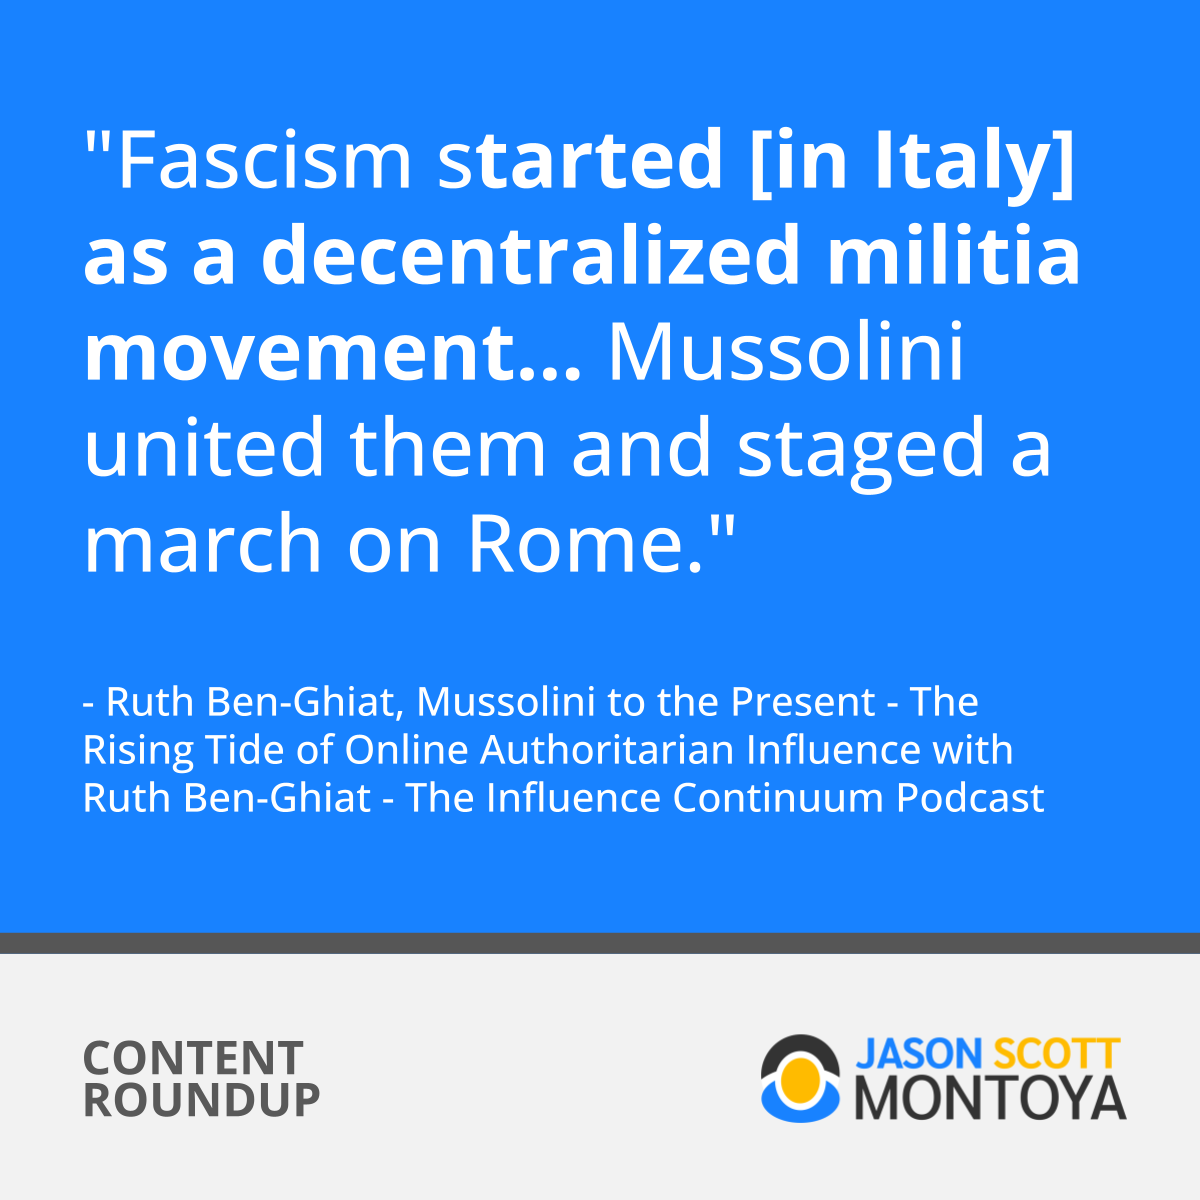 "Fascism started [in Italy] as a decentralized militia movement... Mussolini united them and staged a march on Rome." - Ruth Ben-Ghiat